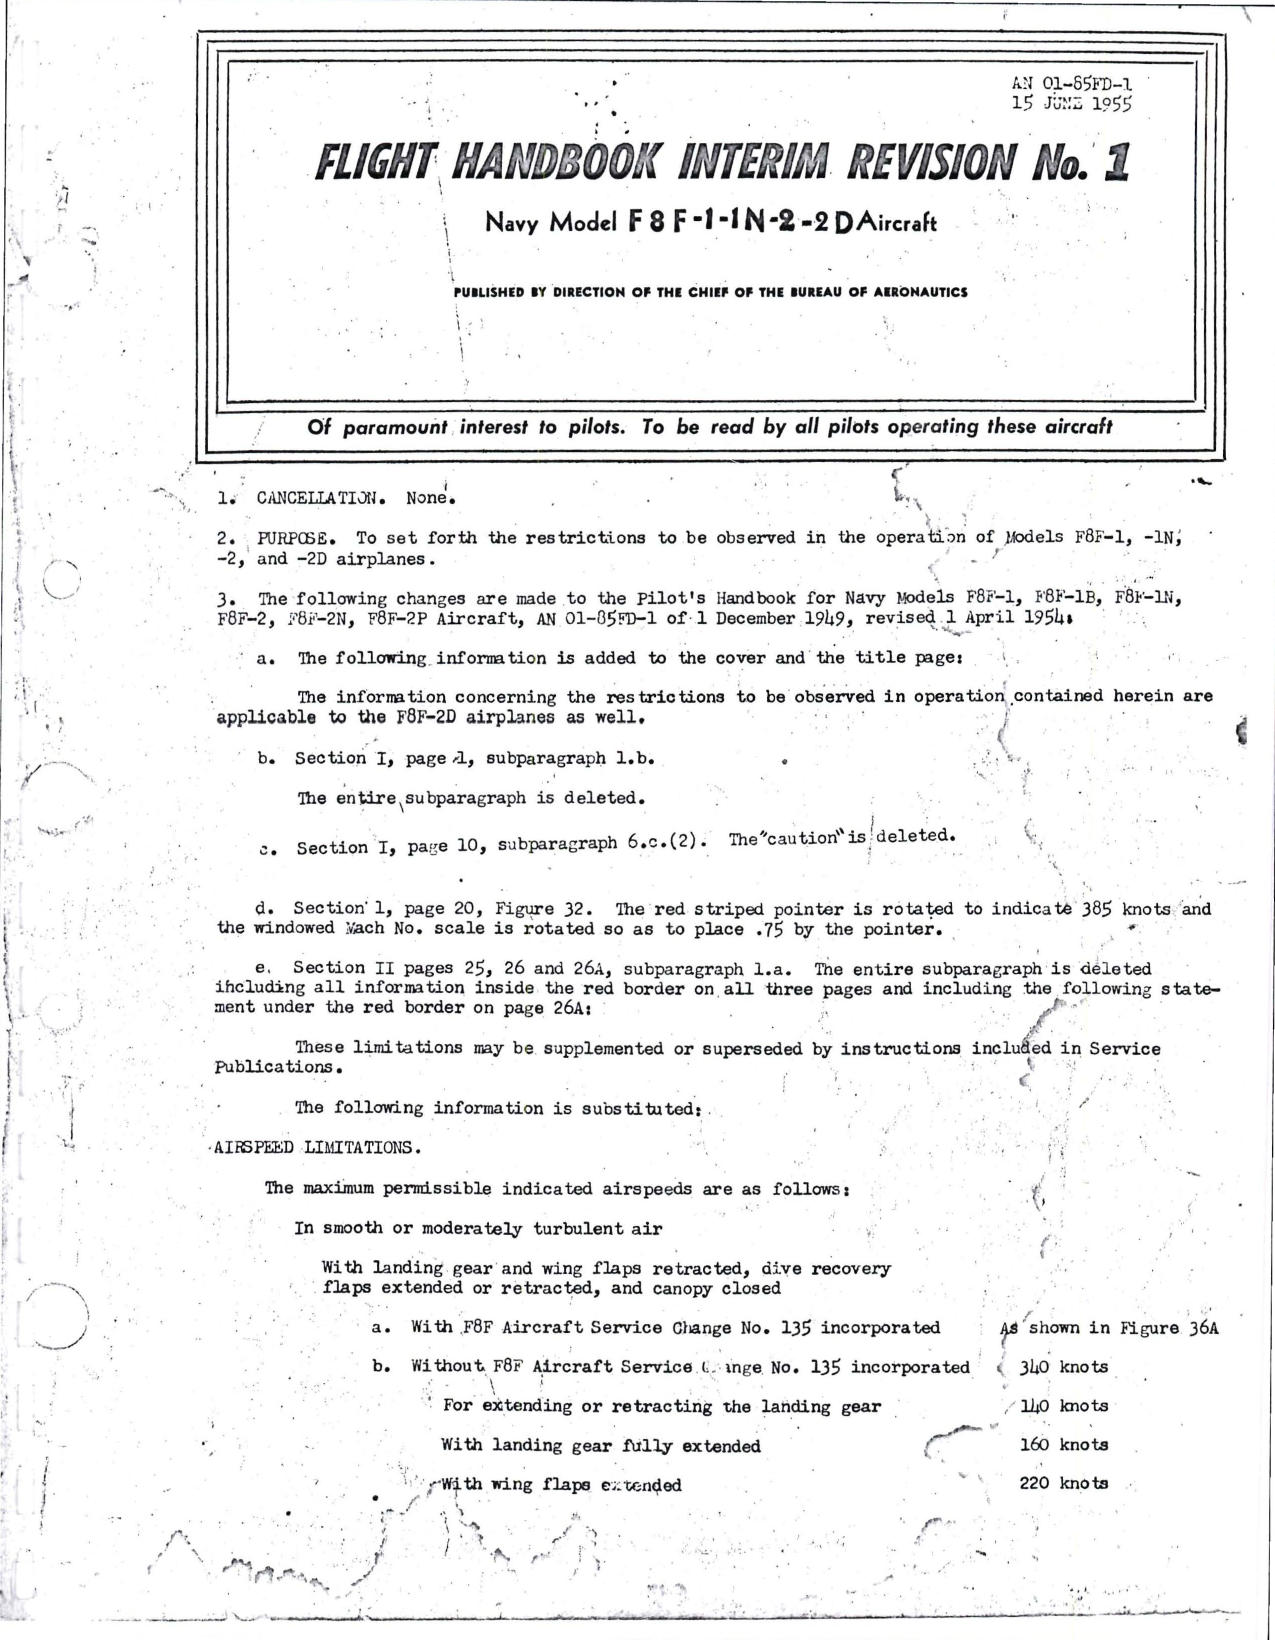 Sample page 1 from AirCorps Library document: Flight Handbook Interim Revision No. 1 for F8F-1, F8F-1N, F8F-2, F8F-2D